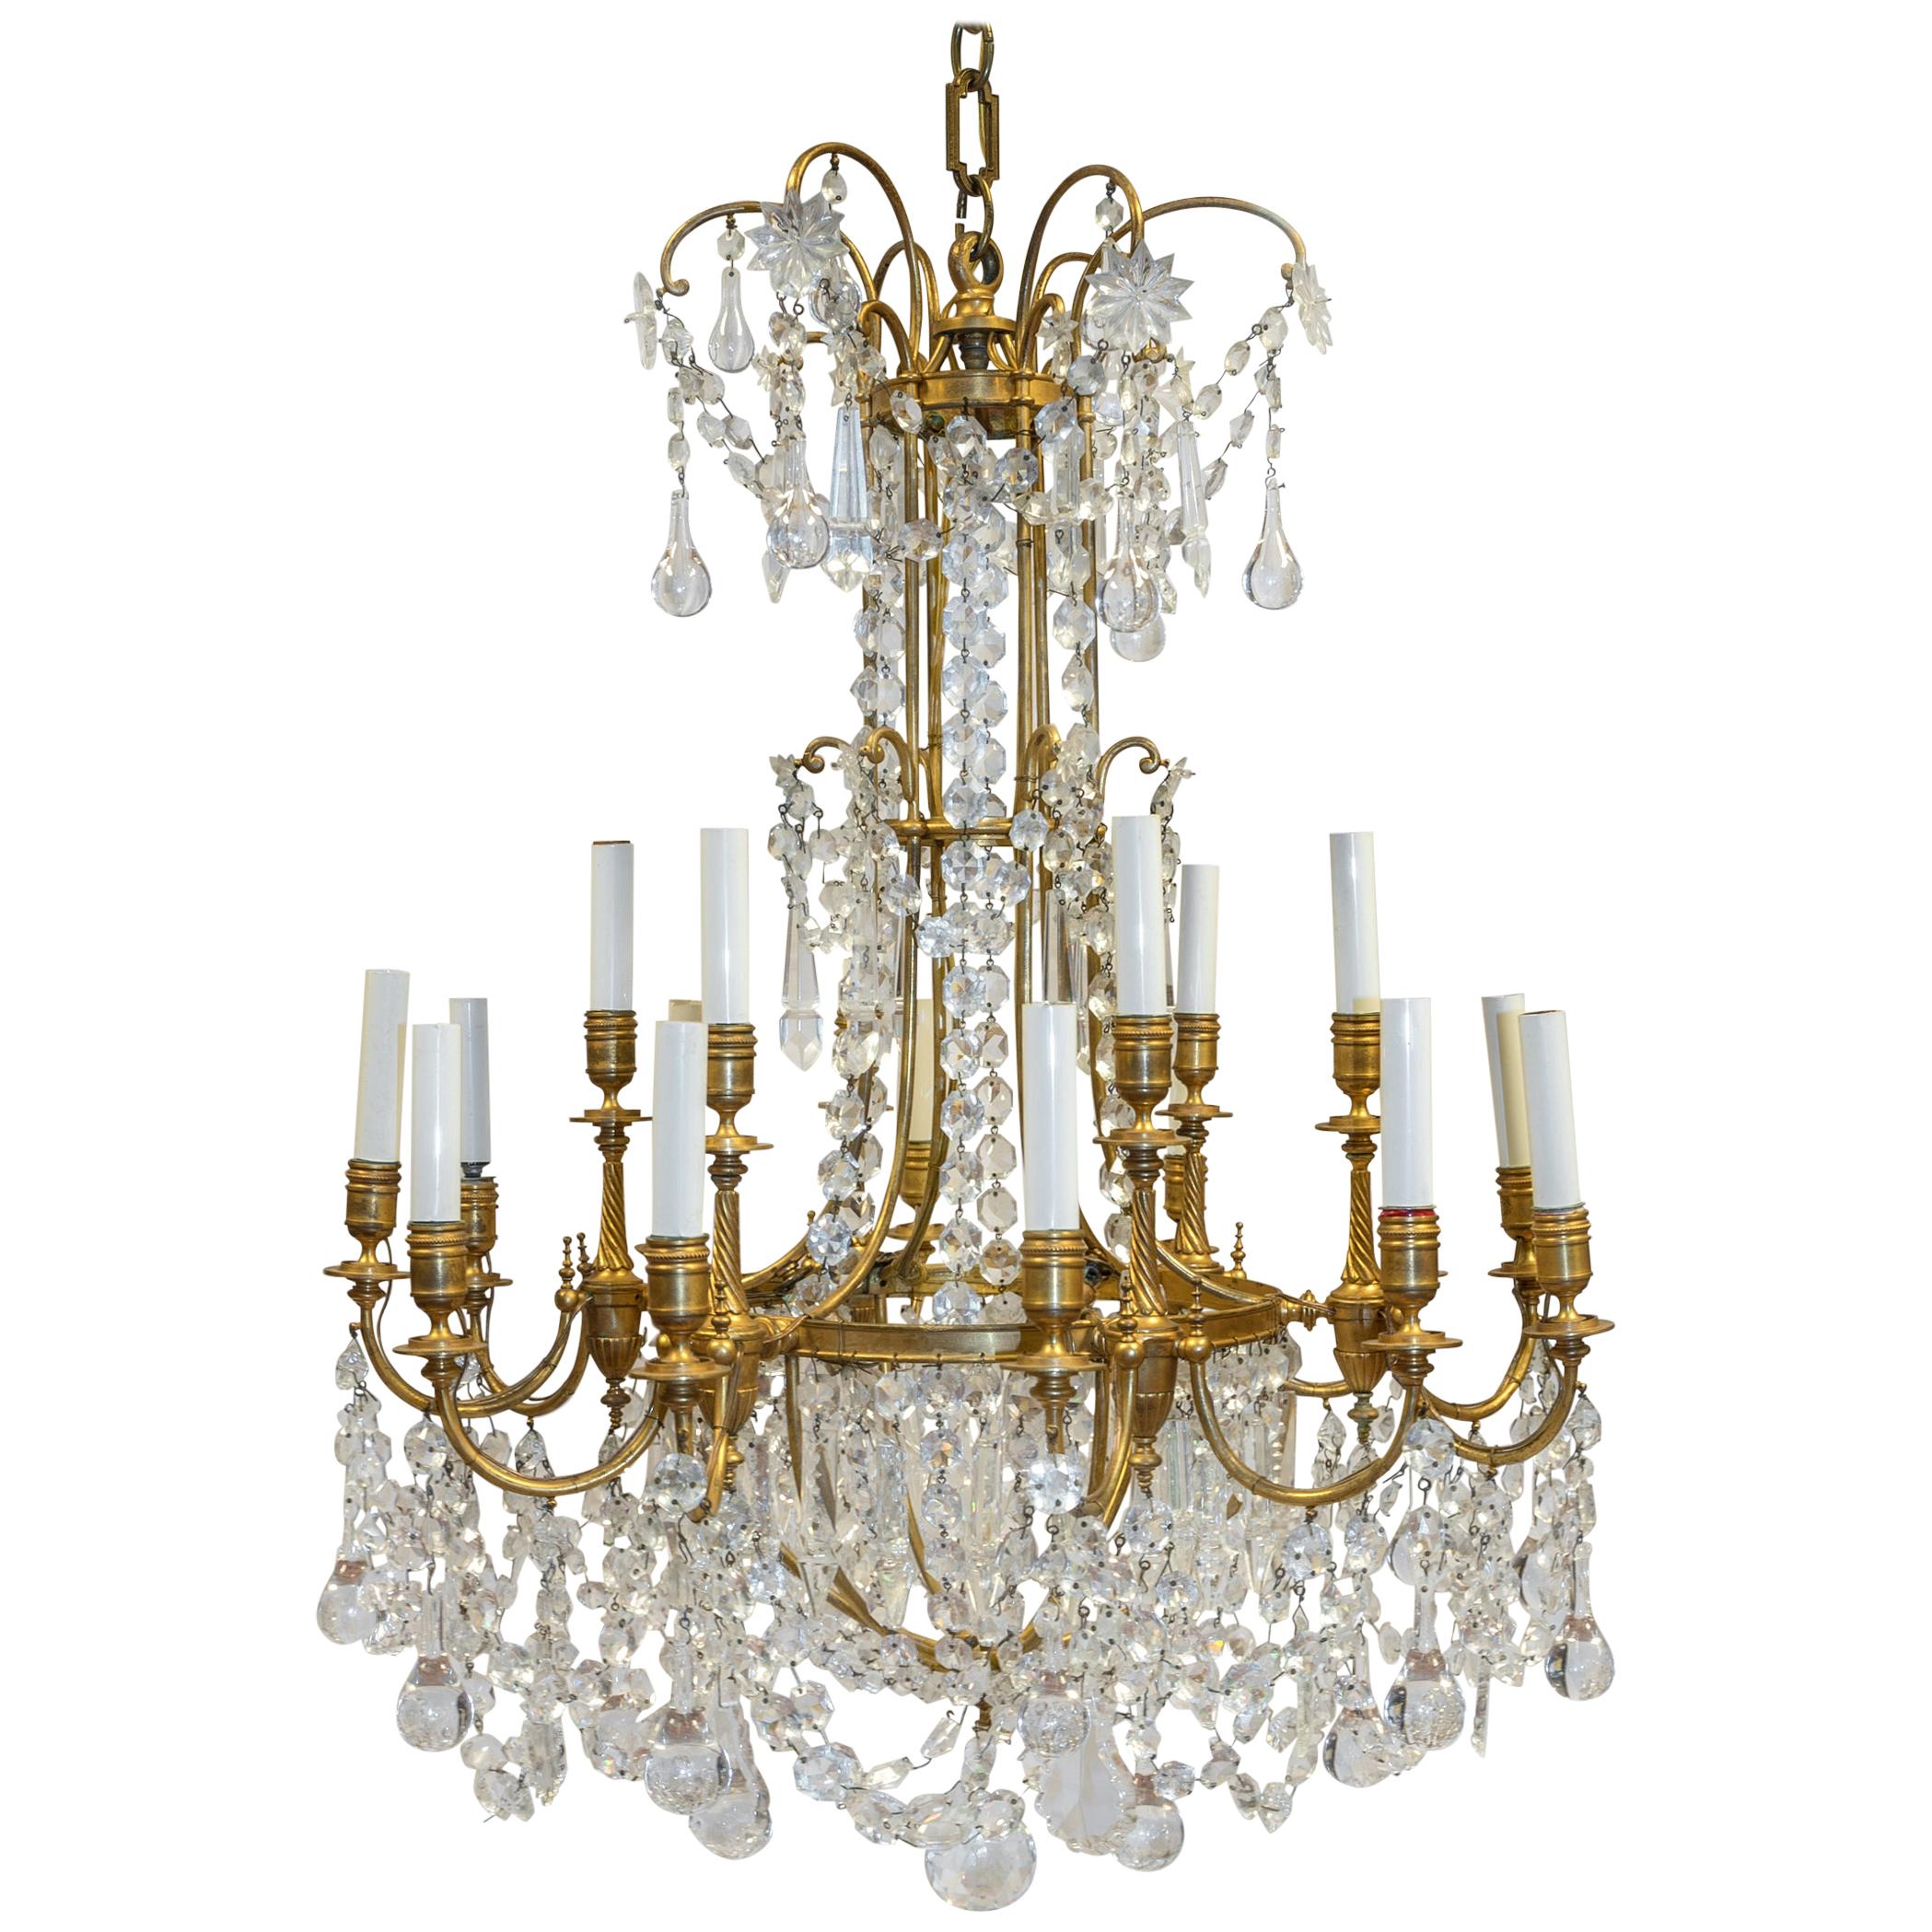 Magnificent French Baccarat and Gilt Bronze Chandelier